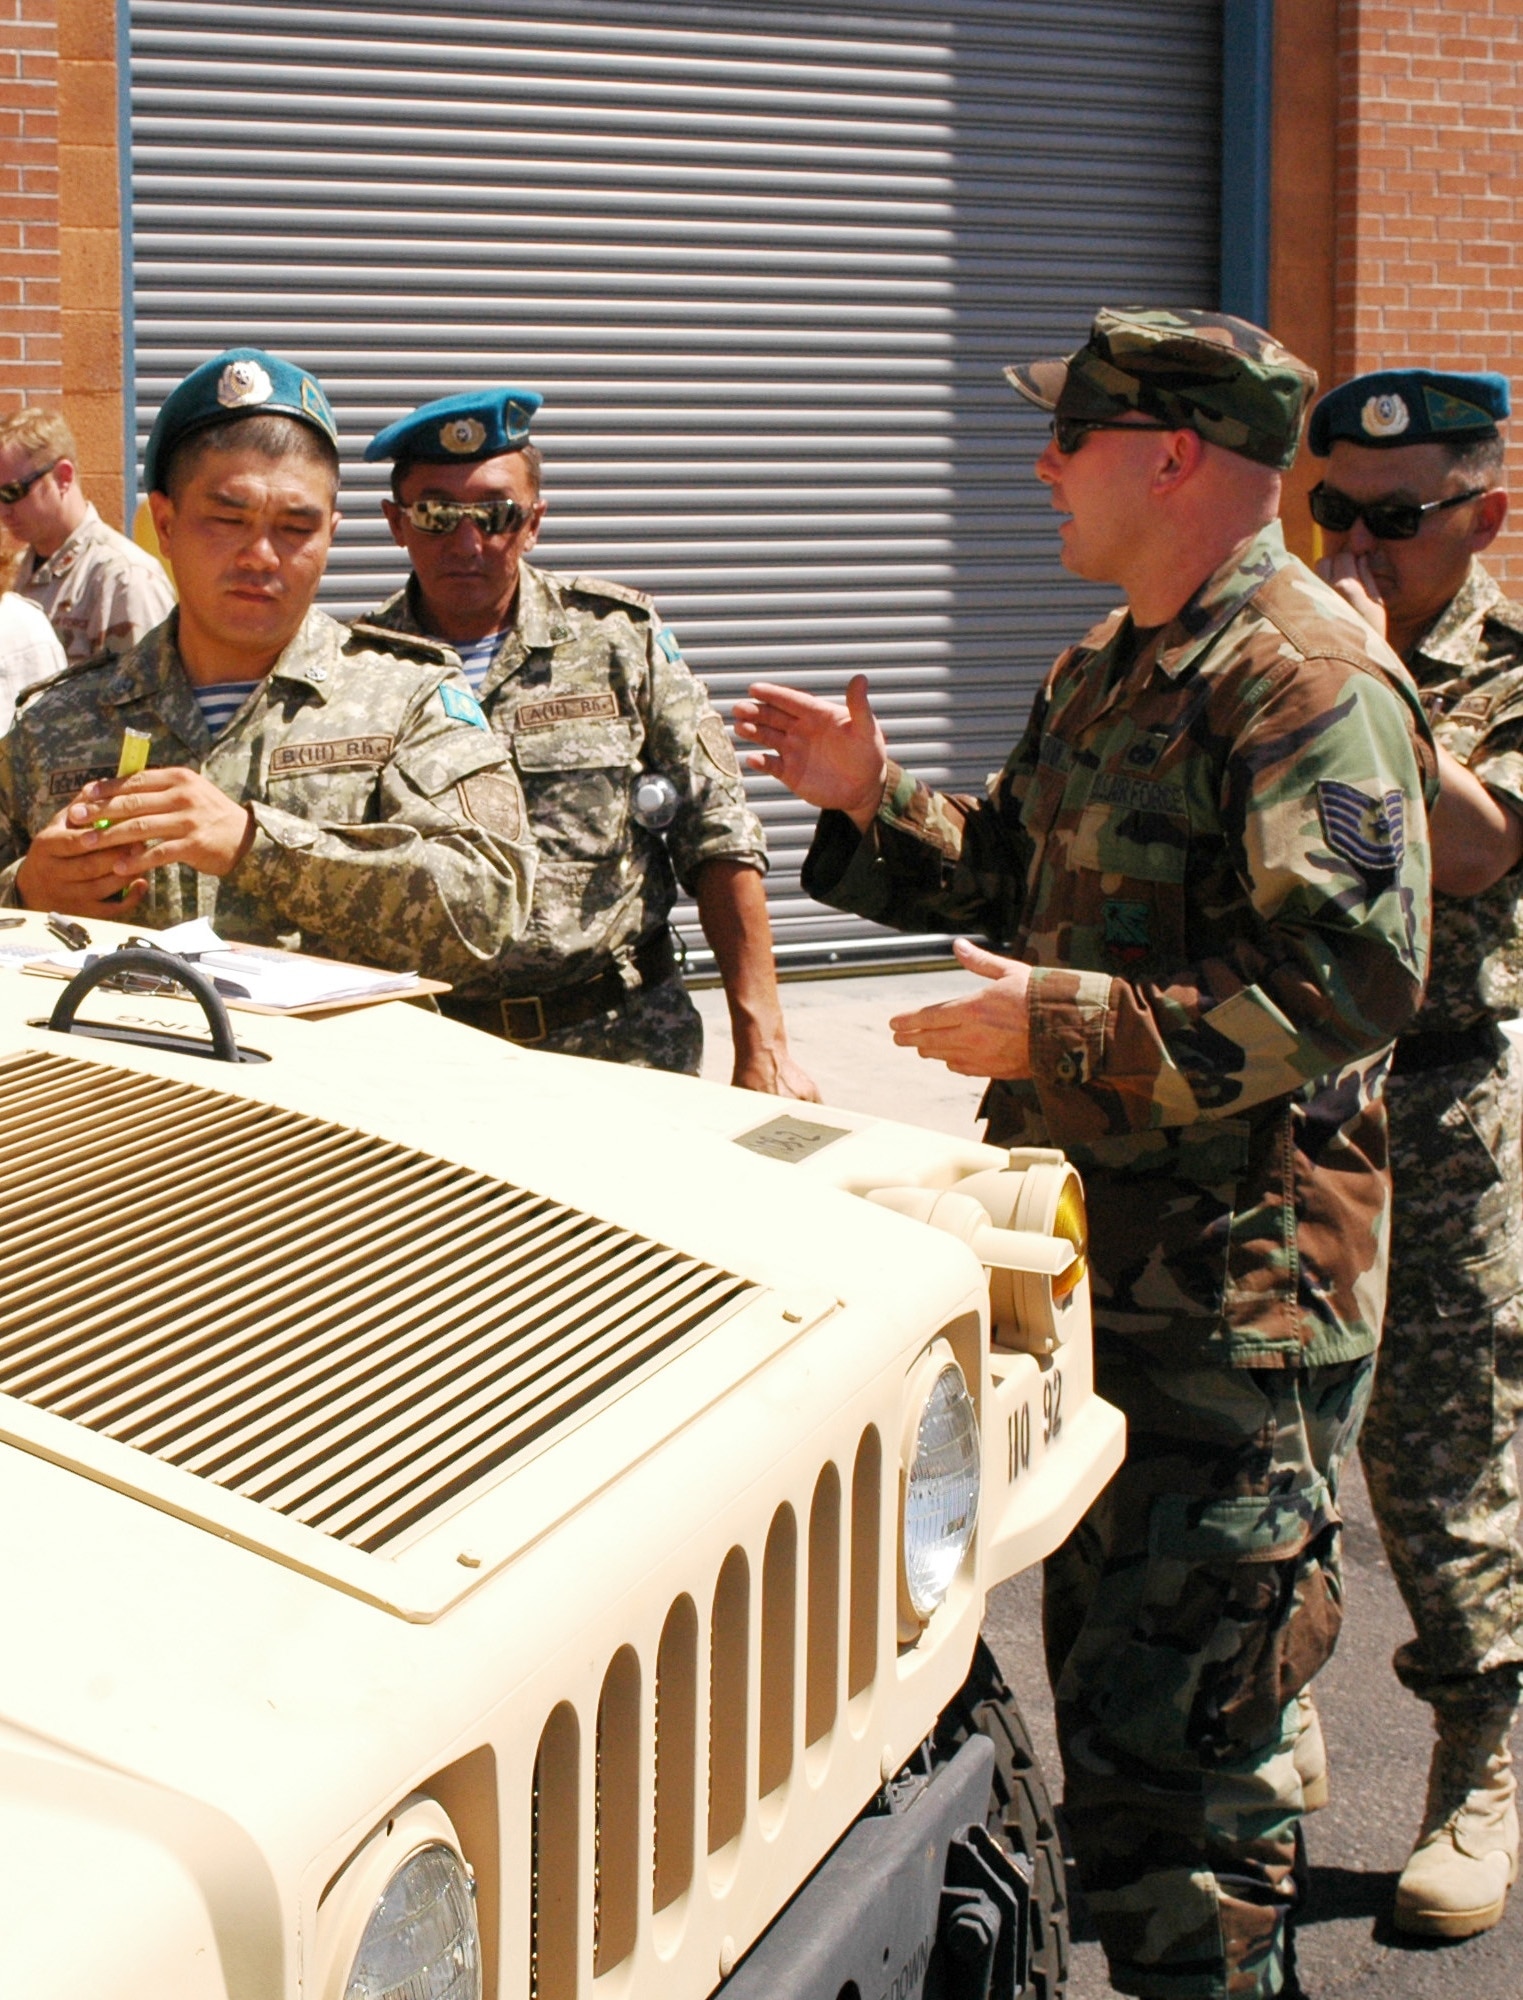 Tech. Sgt. Frank Quinn, 162nd Logistics Readiness Squadron, shows officers from Kazakhstan’s peacekeeping force how to calculate the center balance of a Humvee for airlift, July 28. The delegation’s visit to the 162nd Fighter Wing at Tucson International Airport was organized through the Arizona National Guard’s state partnership with the Central Asian country. (Air National Guard photo by Capt. Gabe Johnson)